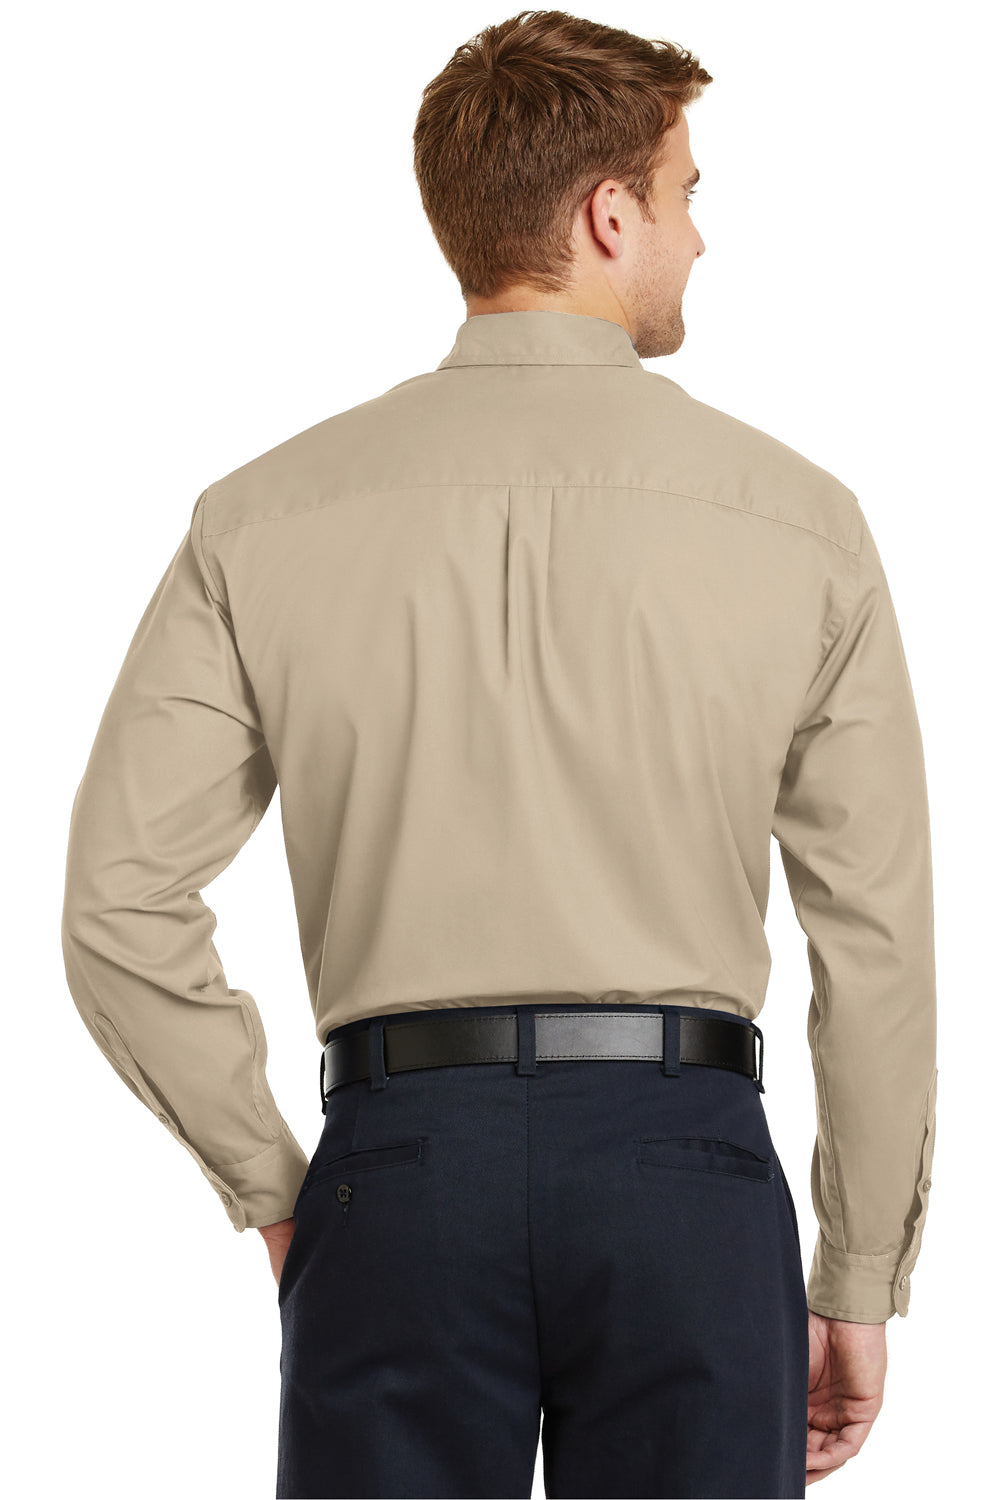 CornerStone SP17 Mens SuperPro Stain Resistant Long Sleeve Button Down Shirt w/ Pocket Stone Brown Back